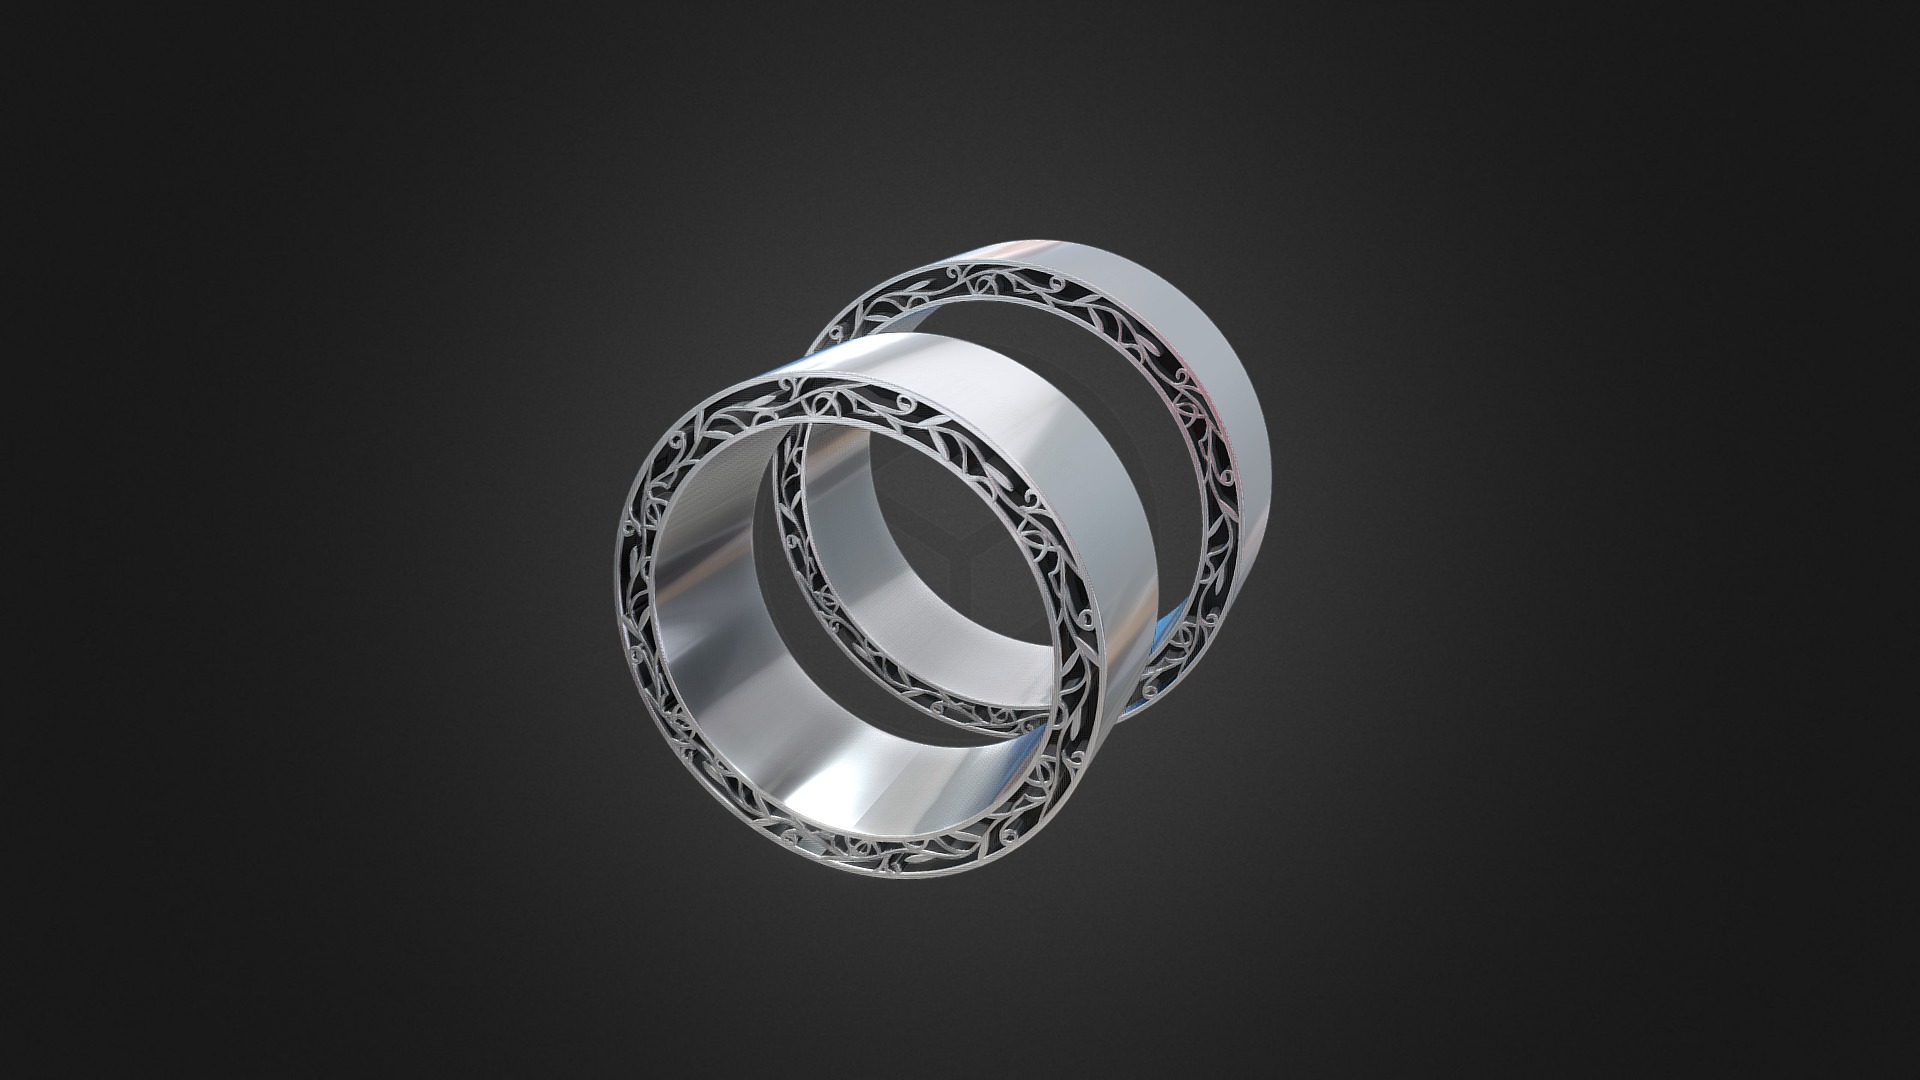 3D model 1063 – Rings - This is a 3D model of the 1063 - Rings. The 3D model is about a ring with a diamond in the middle.